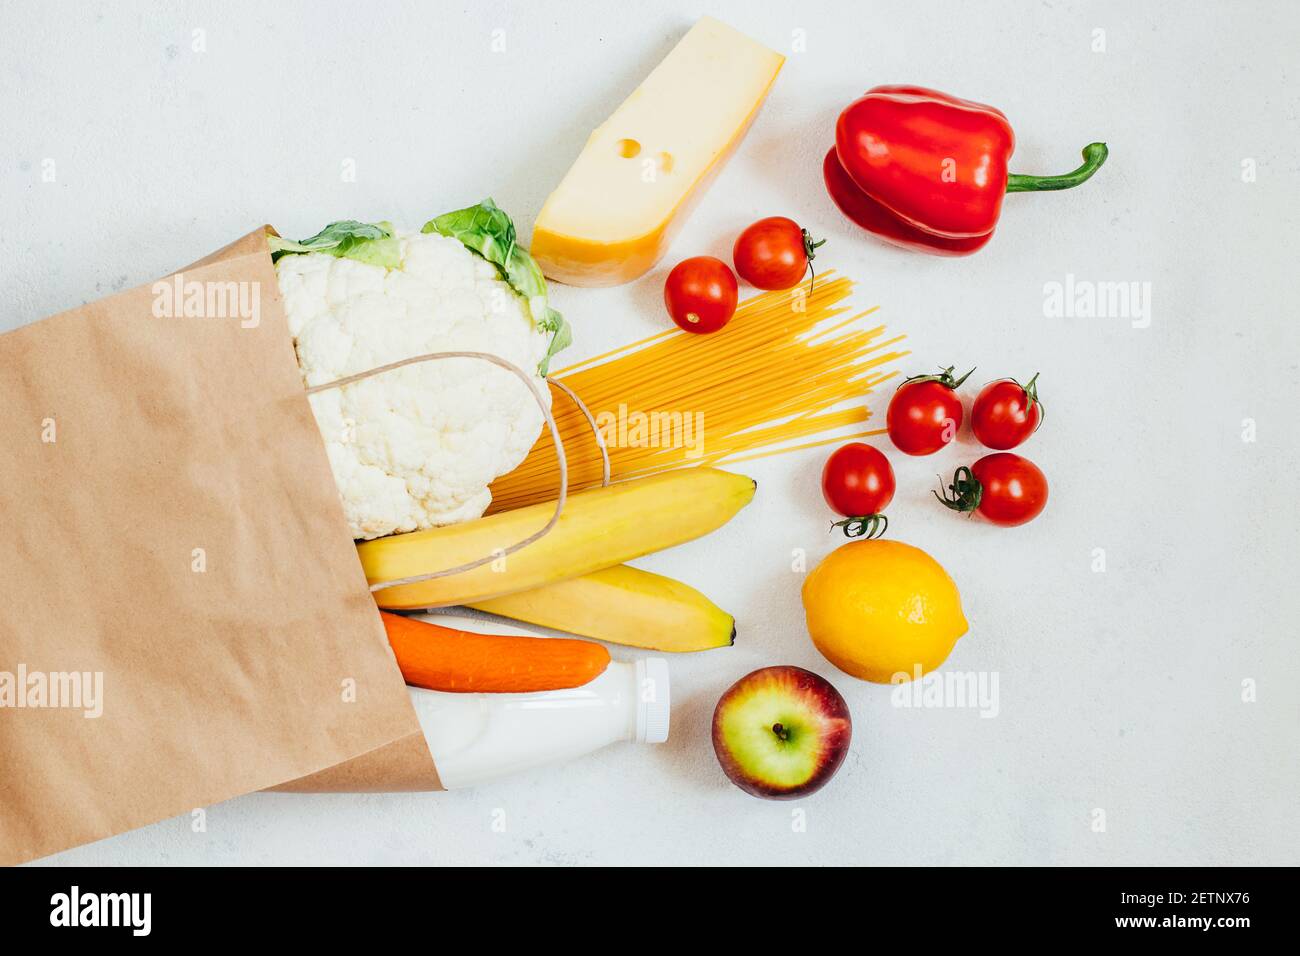 top view of paper bag with fruits, vegetables, spaghetti, cheese, milk on white background Stock Photo